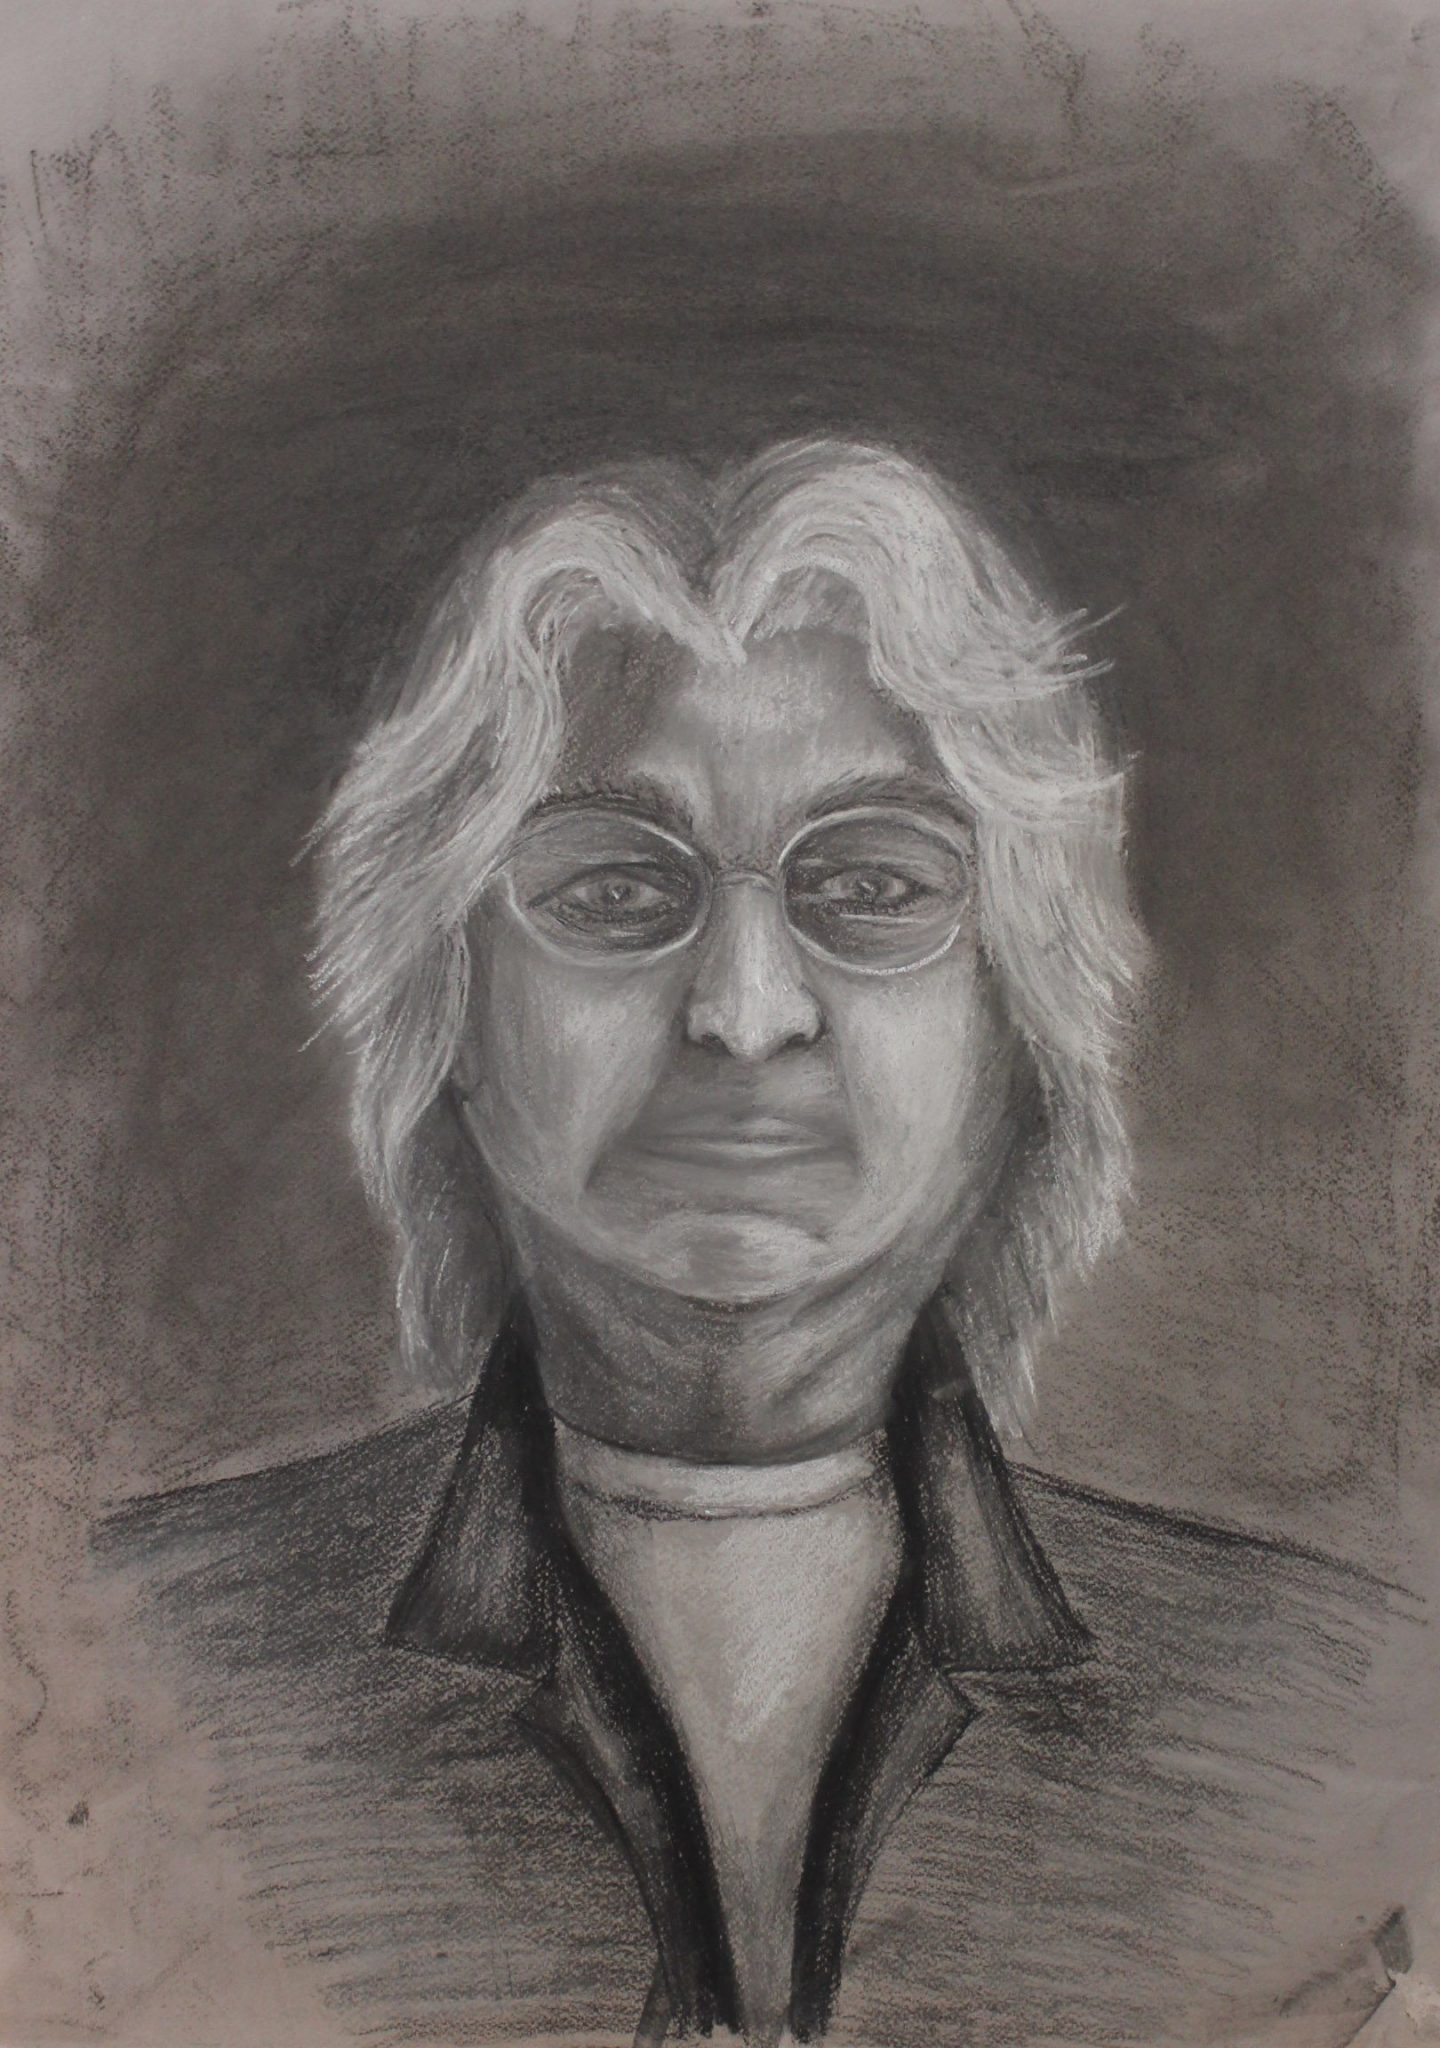 Image Credit: Nola Matthews, Self Portrait, 2016, charcoal on paper. Collection of the artist.